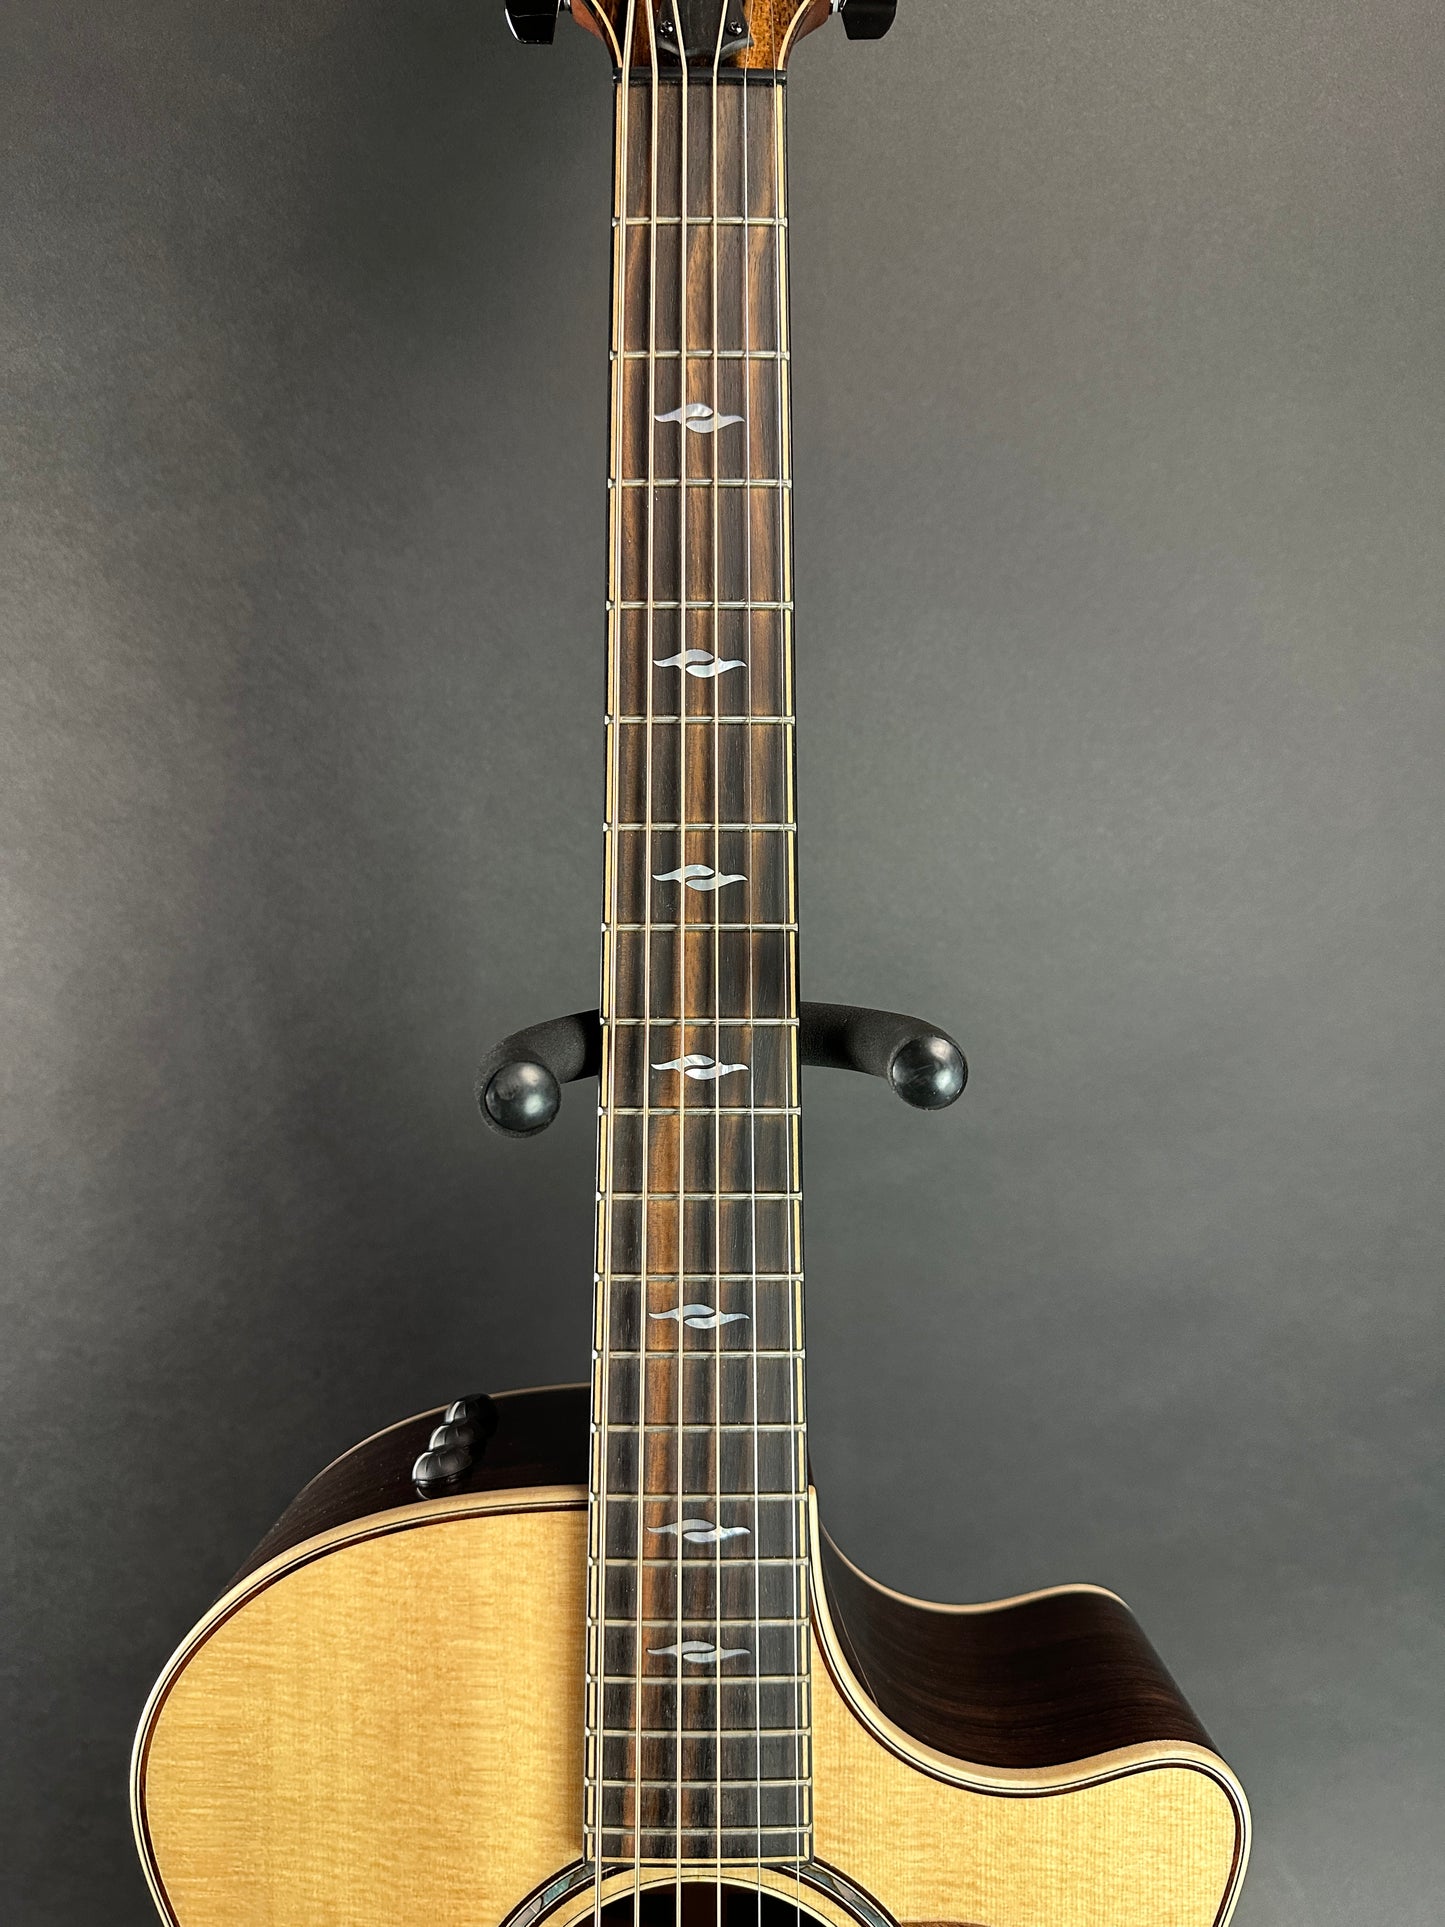 Fretboard of Used 2022 Taylor 814ce V-Class.